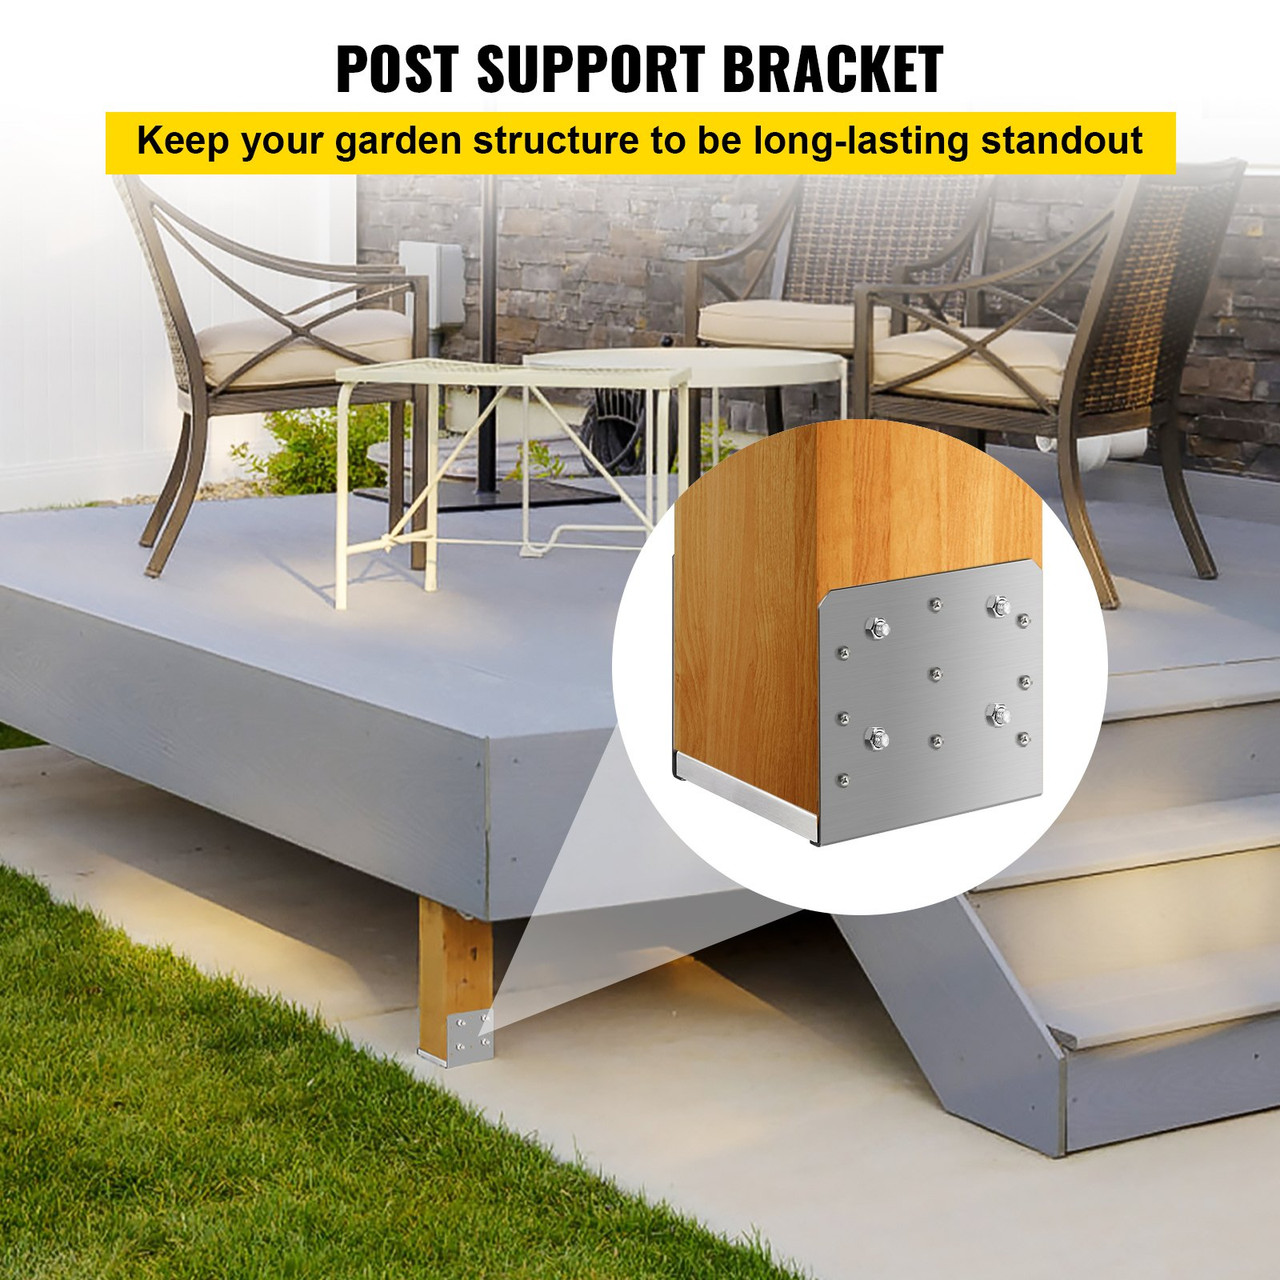 Standoff Post Base 8 x 8"(Inner Size:7.8 x 7.48") 4 PCS Stainless Steel Adjustable Post Base Adjustable Post Anchor with Fiber Drawing Surface and Full Set of Accessories for Rough Size Lumber